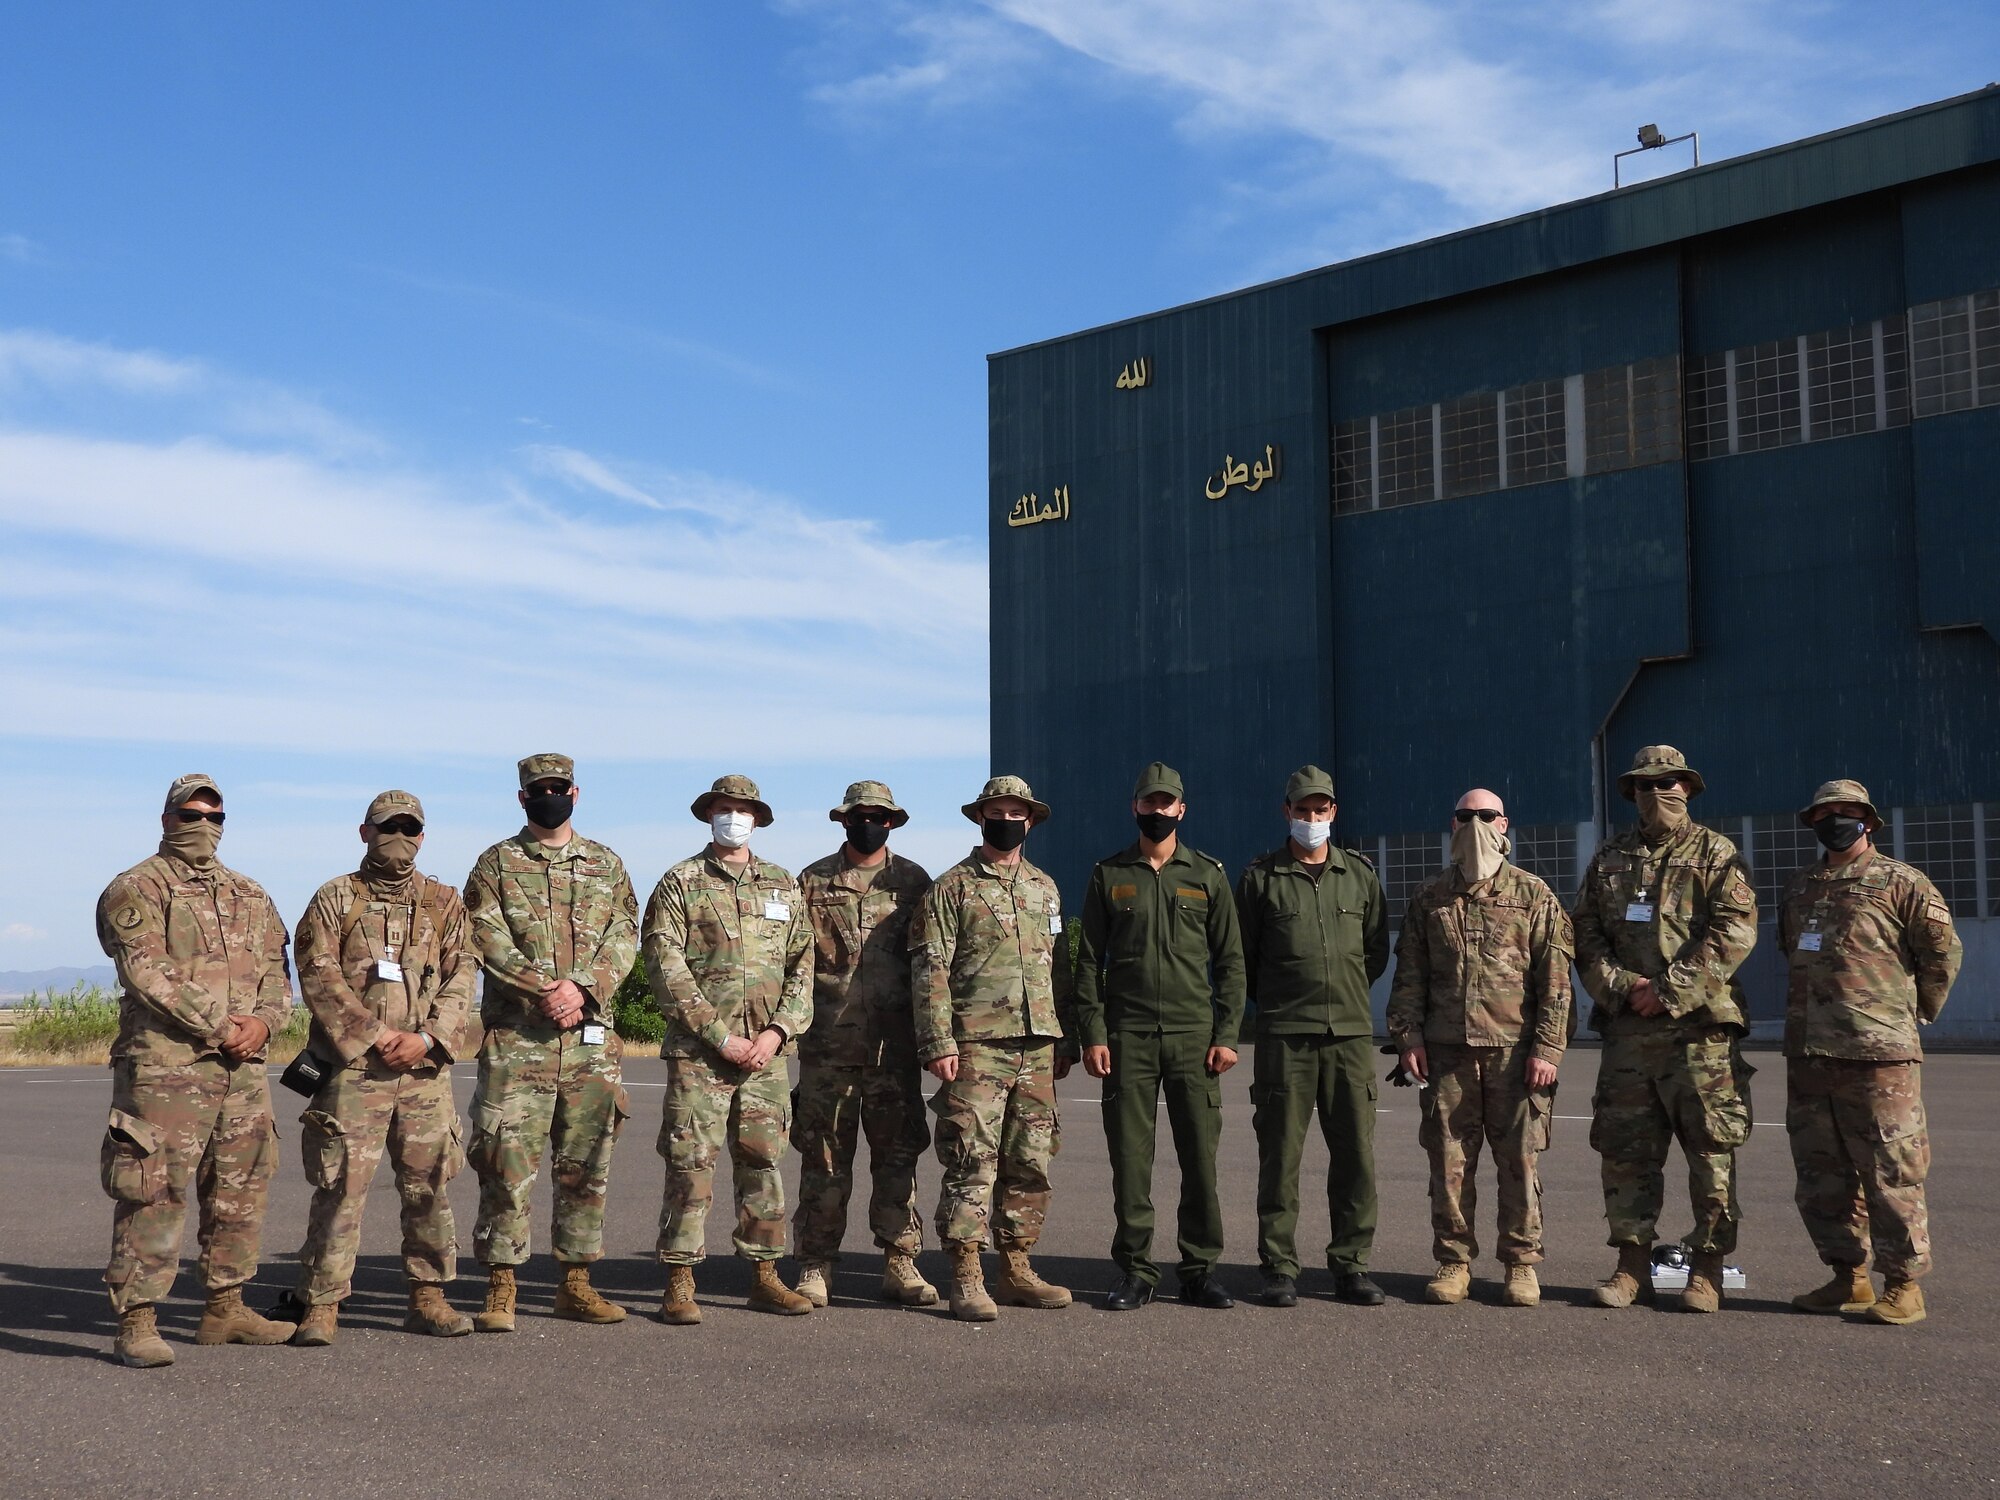 Airmen with the 621st Contingency Response Wing airfield survey team and members of the Royal Moroccan Air Force pose for a group photo in front of an aircraft hangar at Ben Guerir Air Base, Morocco, April 21, 2021. The Royal Moroccan Air Force motto “God, Country, King” can be seen written in Arabic on the hangar. Missions like this allow Devil Raiders to strengthen relationships with partner nations. (courtesy photo)